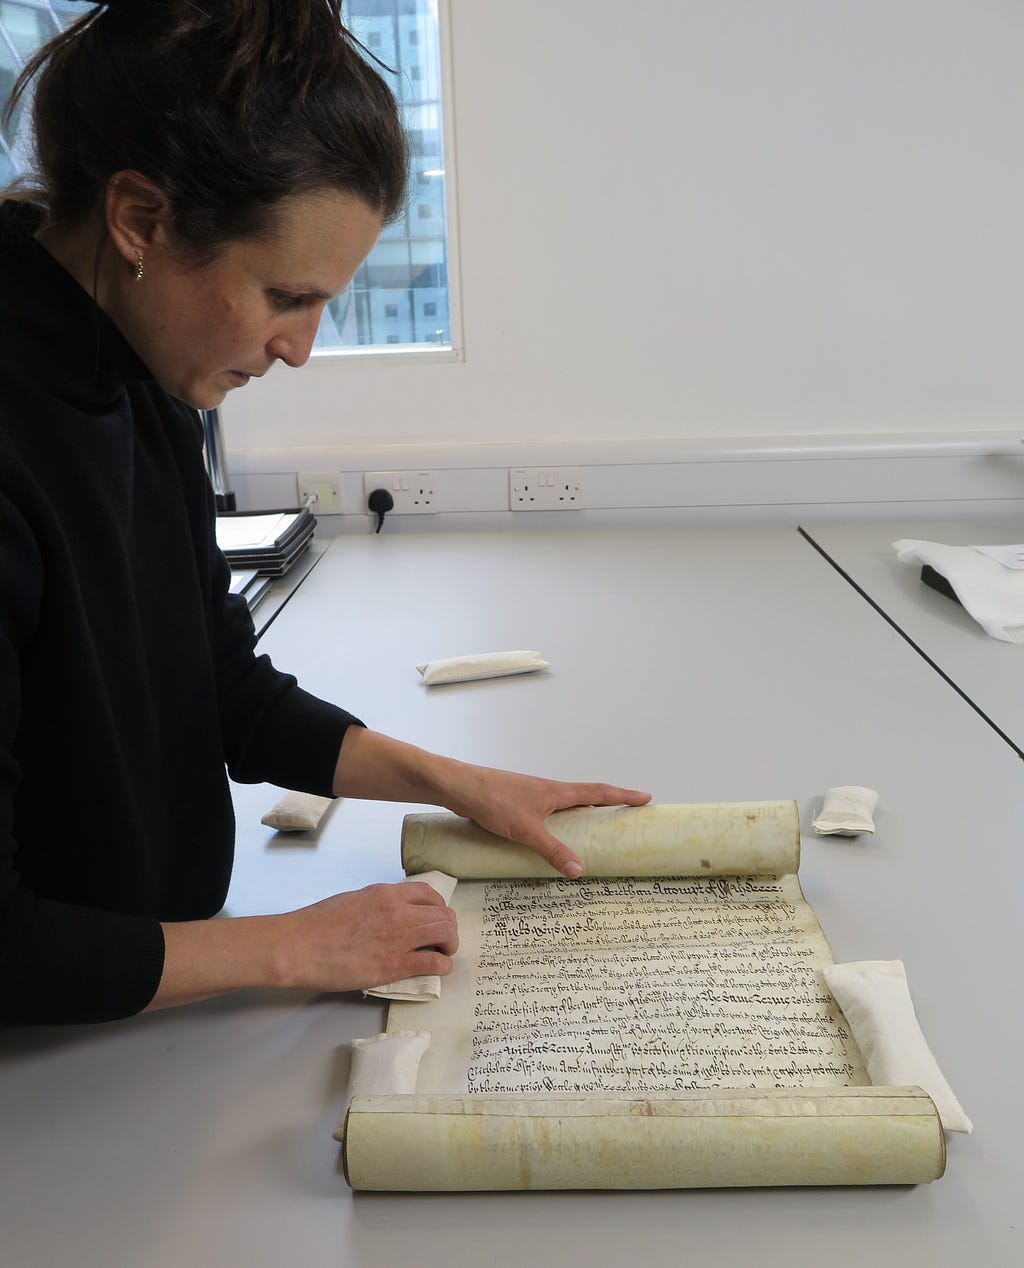 A conservator unrolling a small section of a tightly rolled parchment scroll by placing small soft archival cloth covered weights along the edges.